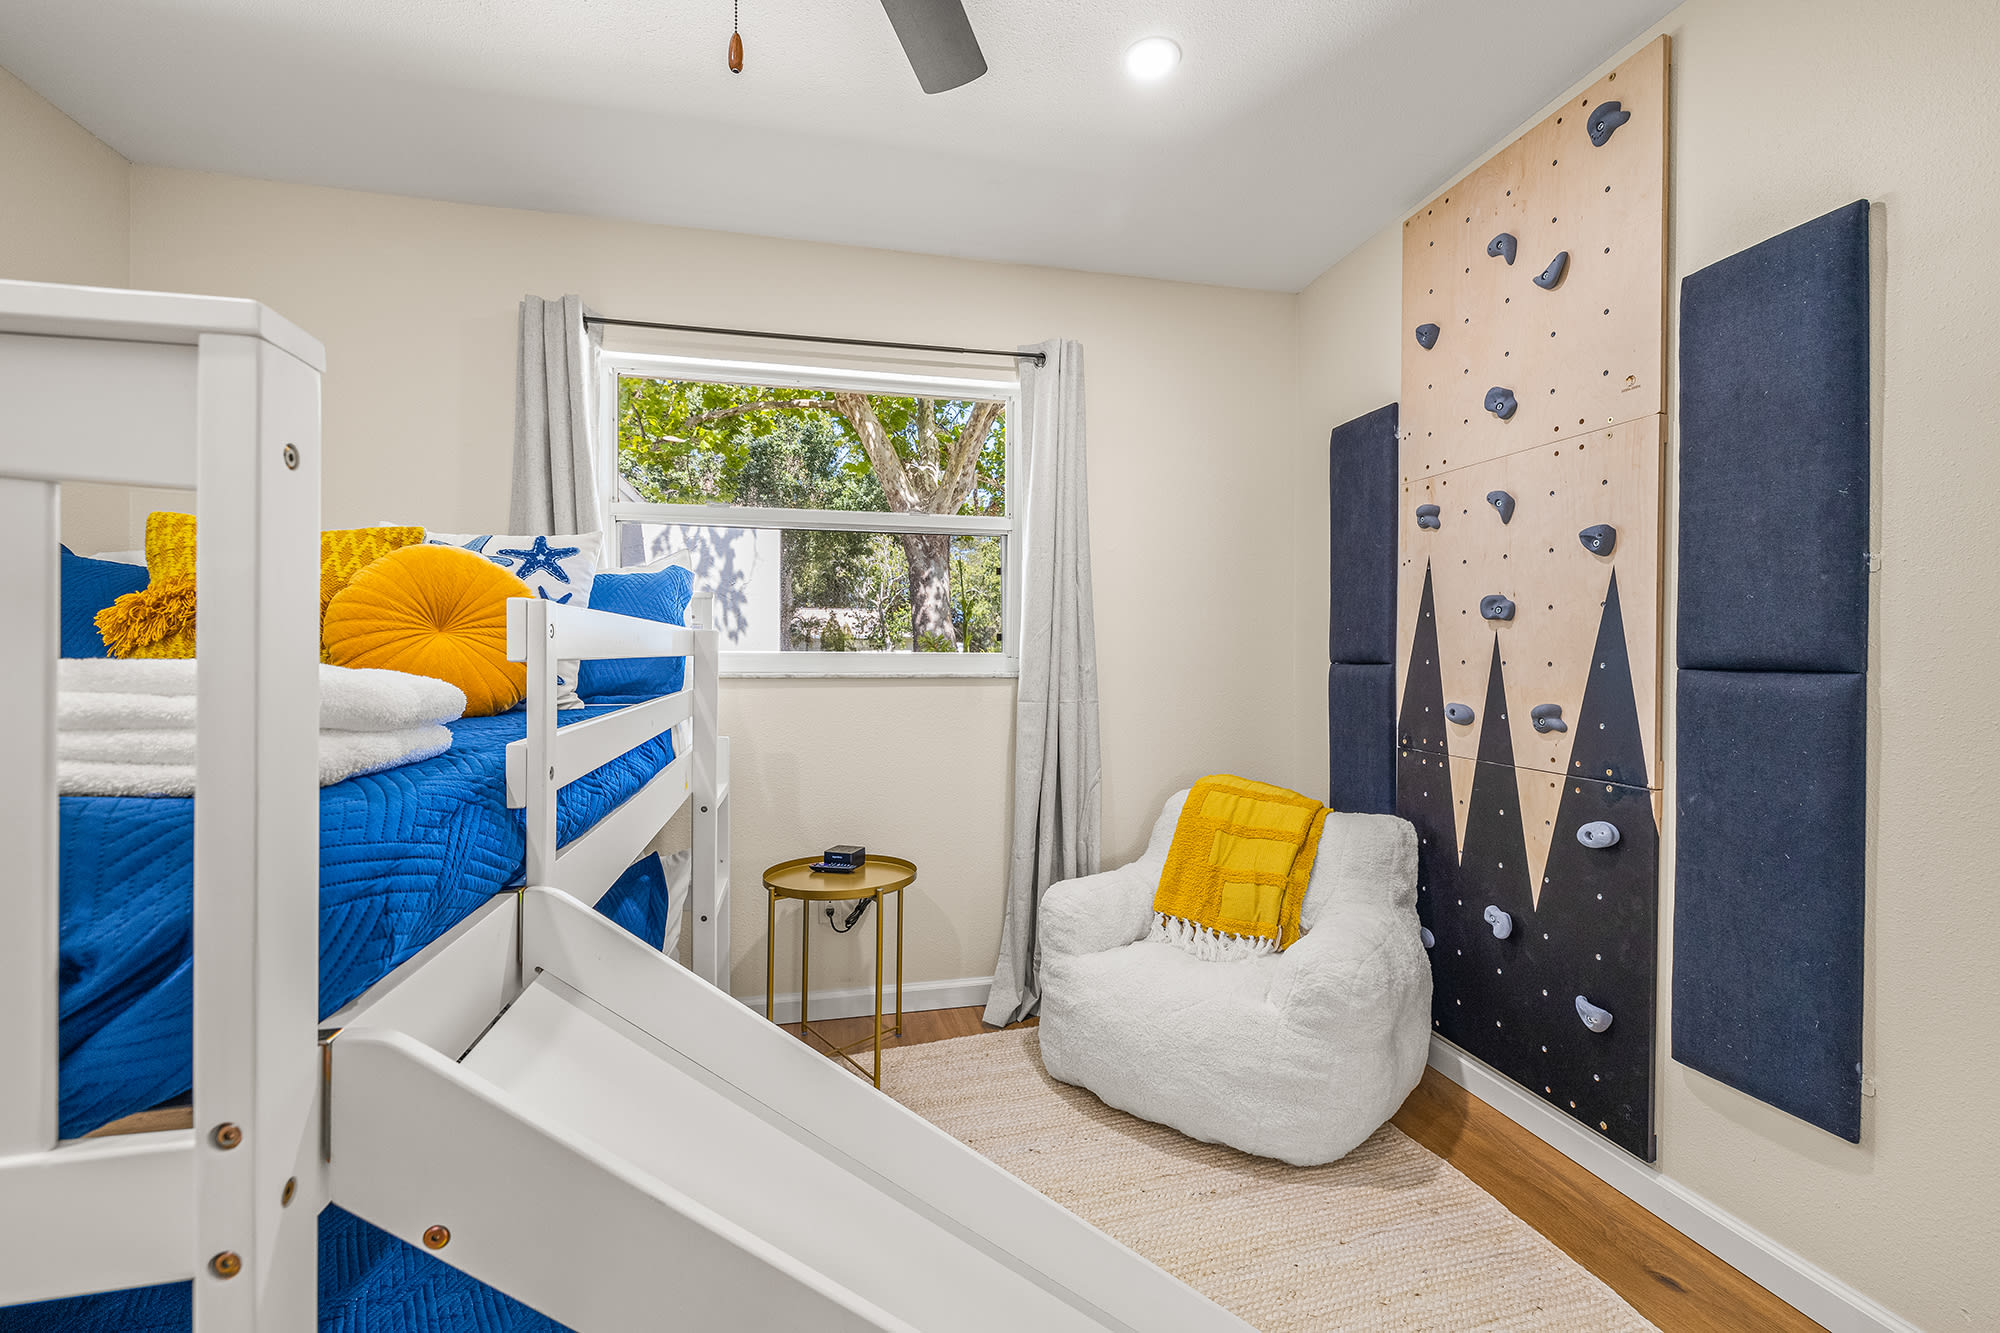 Welcome to the bunk room- this room is a kid's dream with 2 full beds (sleeps 4), a rock wall, 2 bean bags, a Smart TV, mirror, and closet